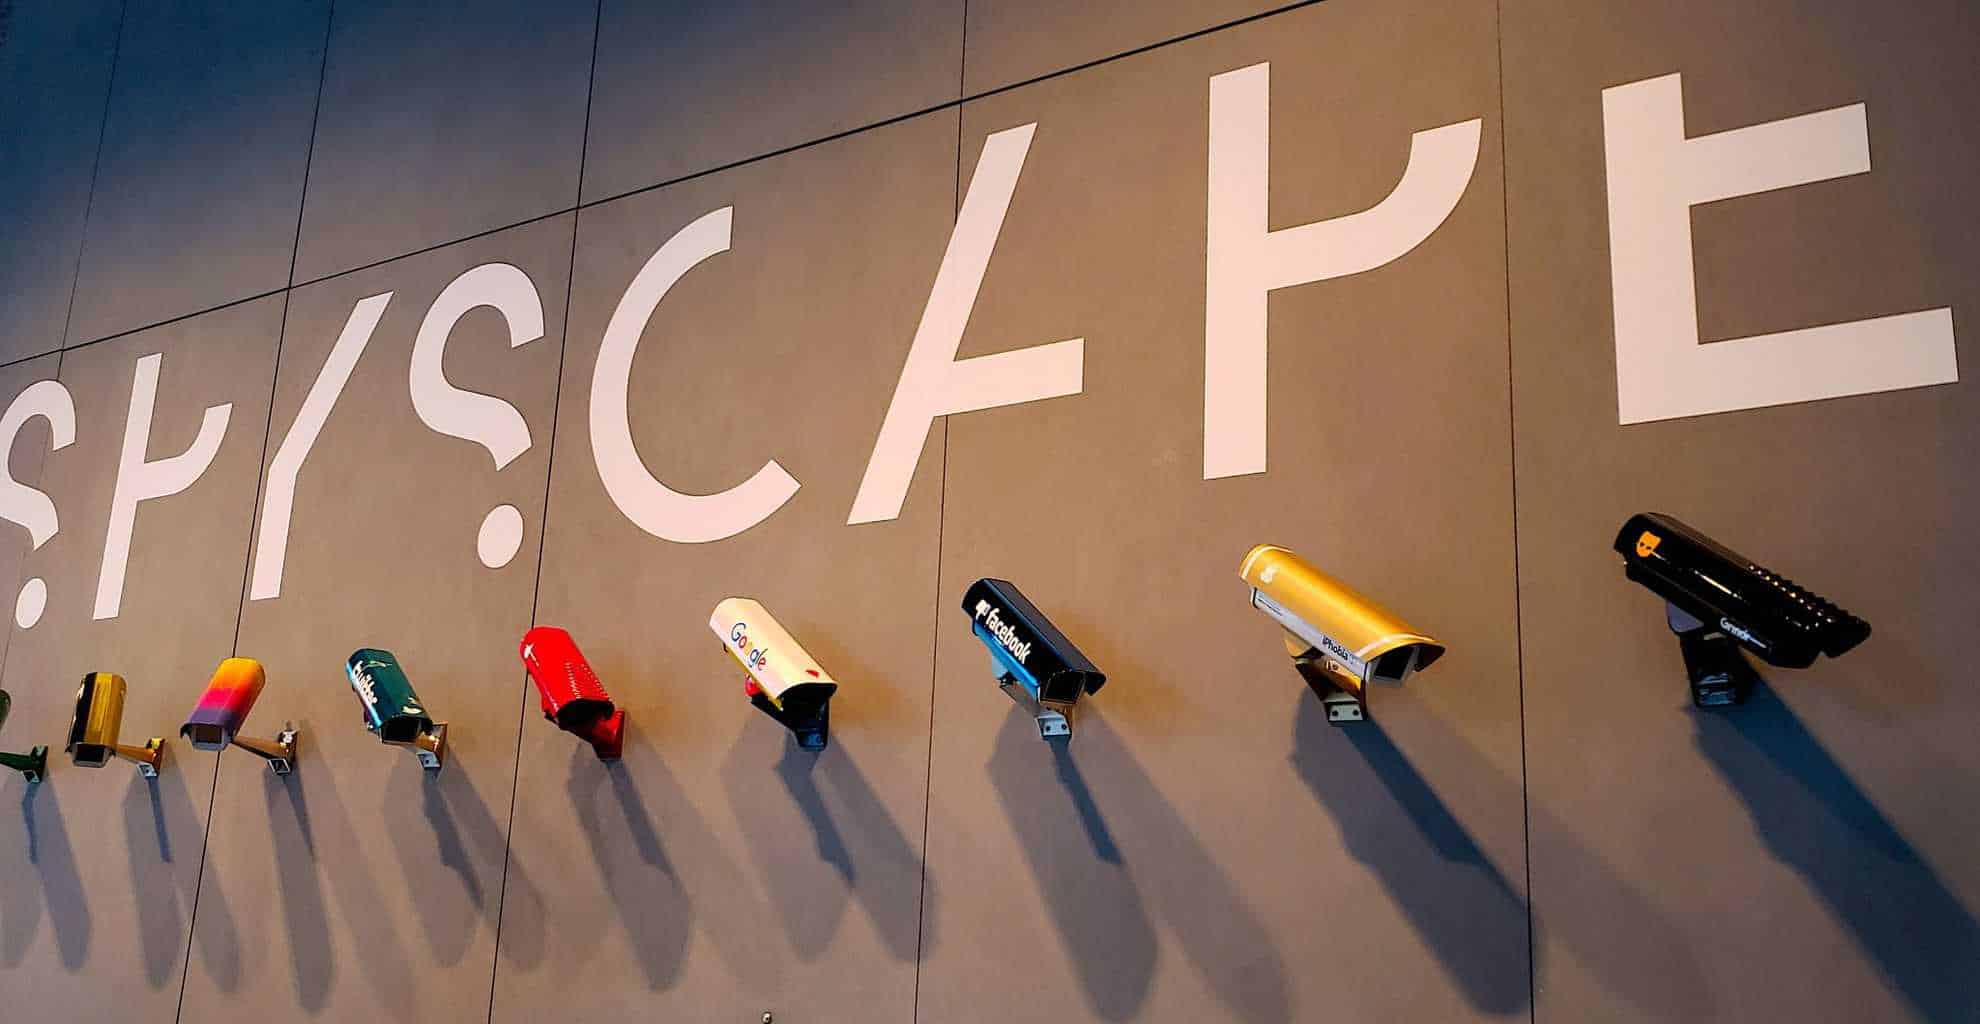 Become a spy for the day at NYC's interactive, Spyscape Museum.